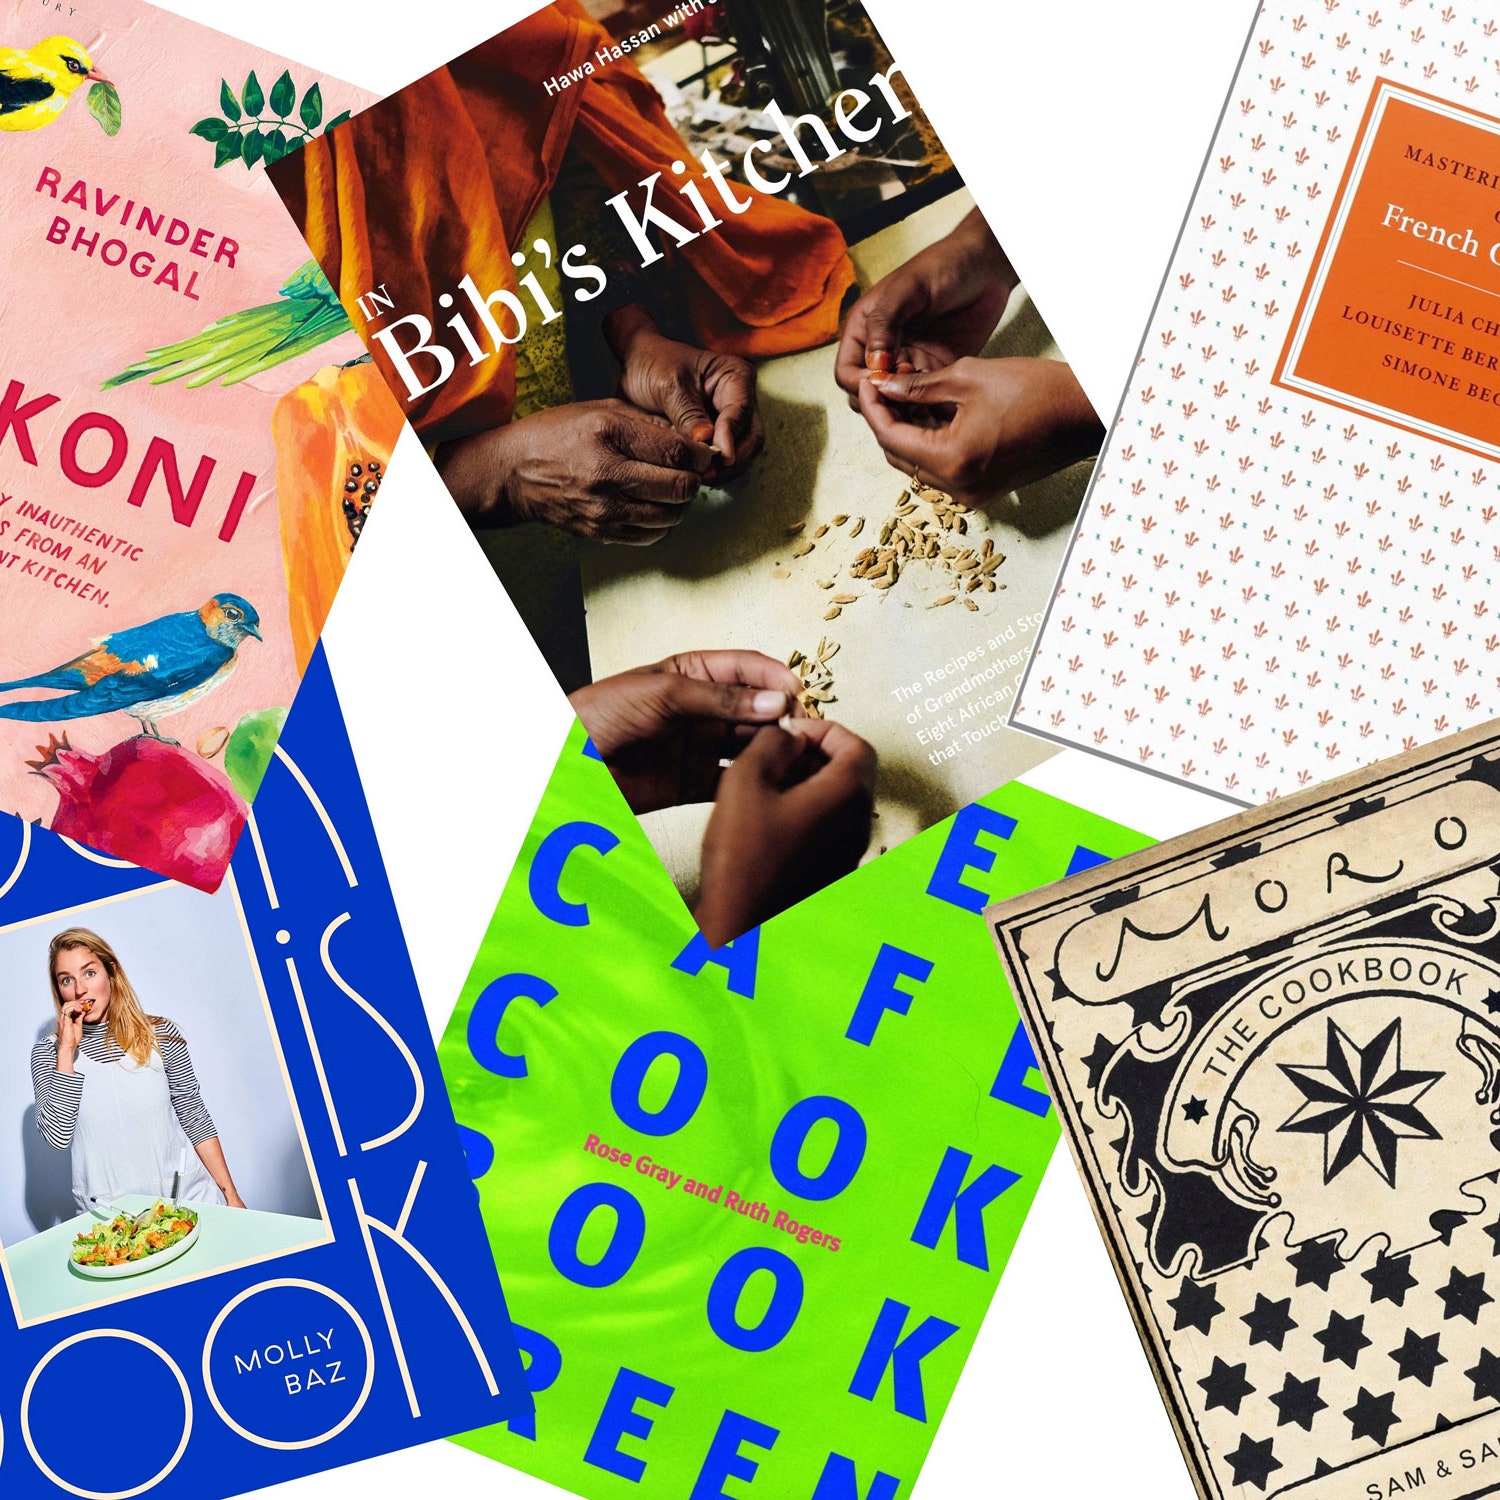 The very best cookbooks to gift or be gifted, according to our food editor